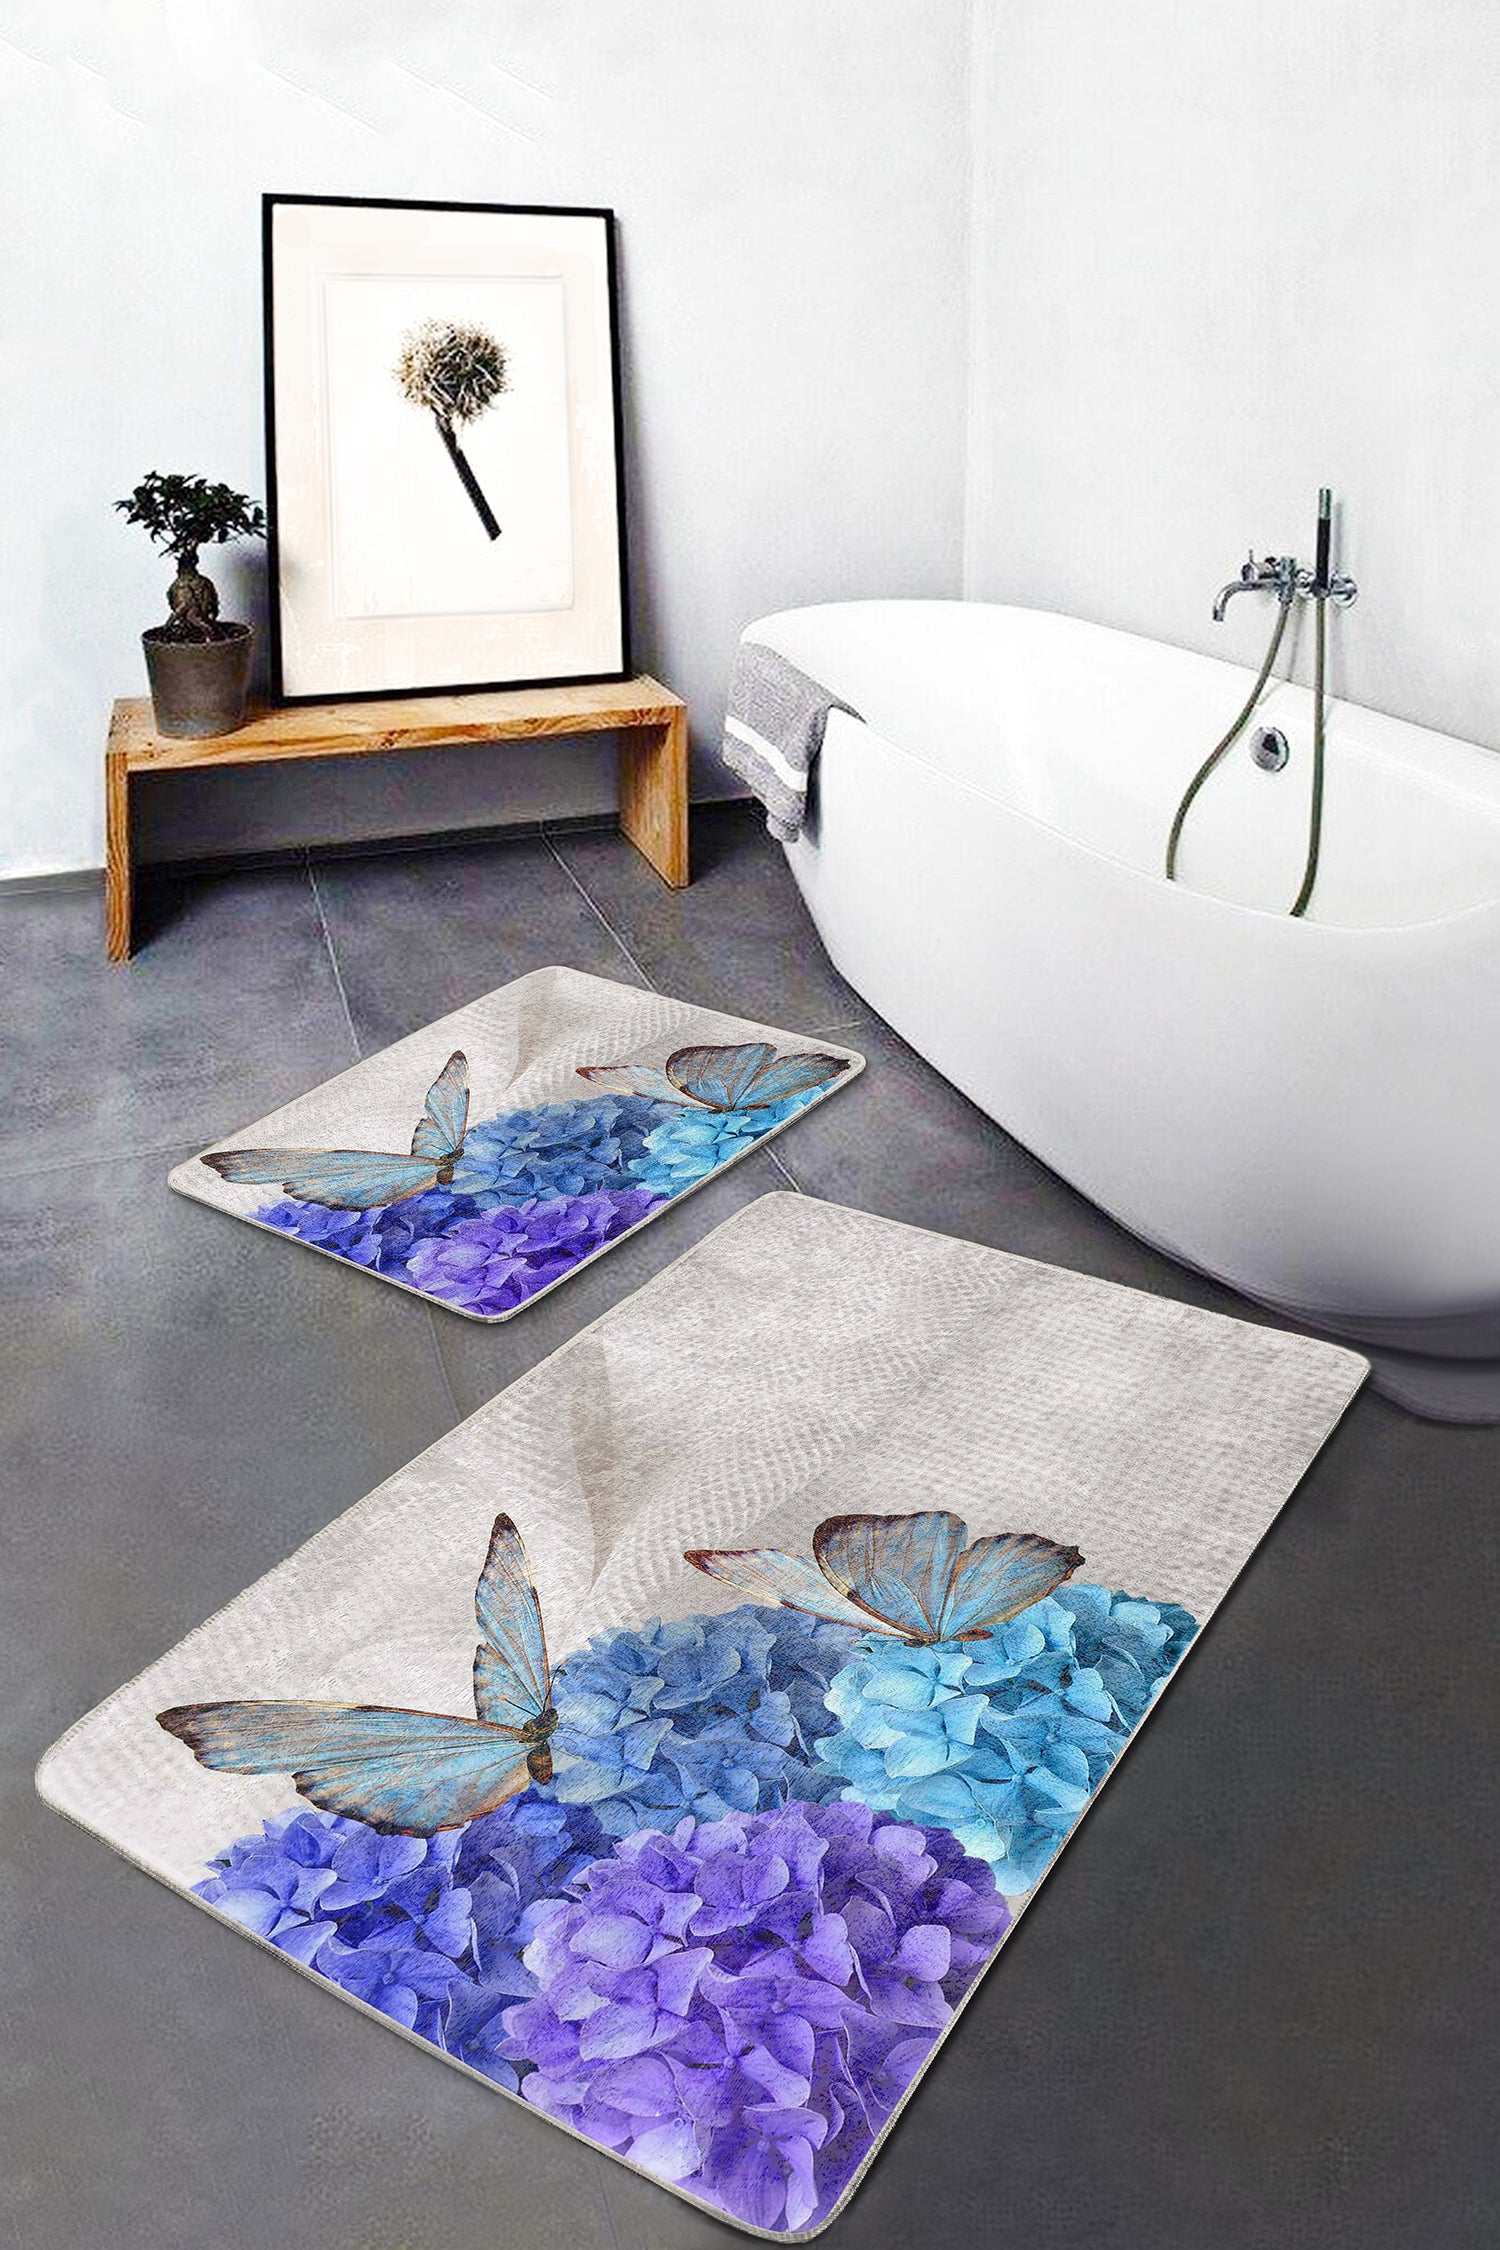 Functional Mat with a Whimsical and Elegant Butterfly Design